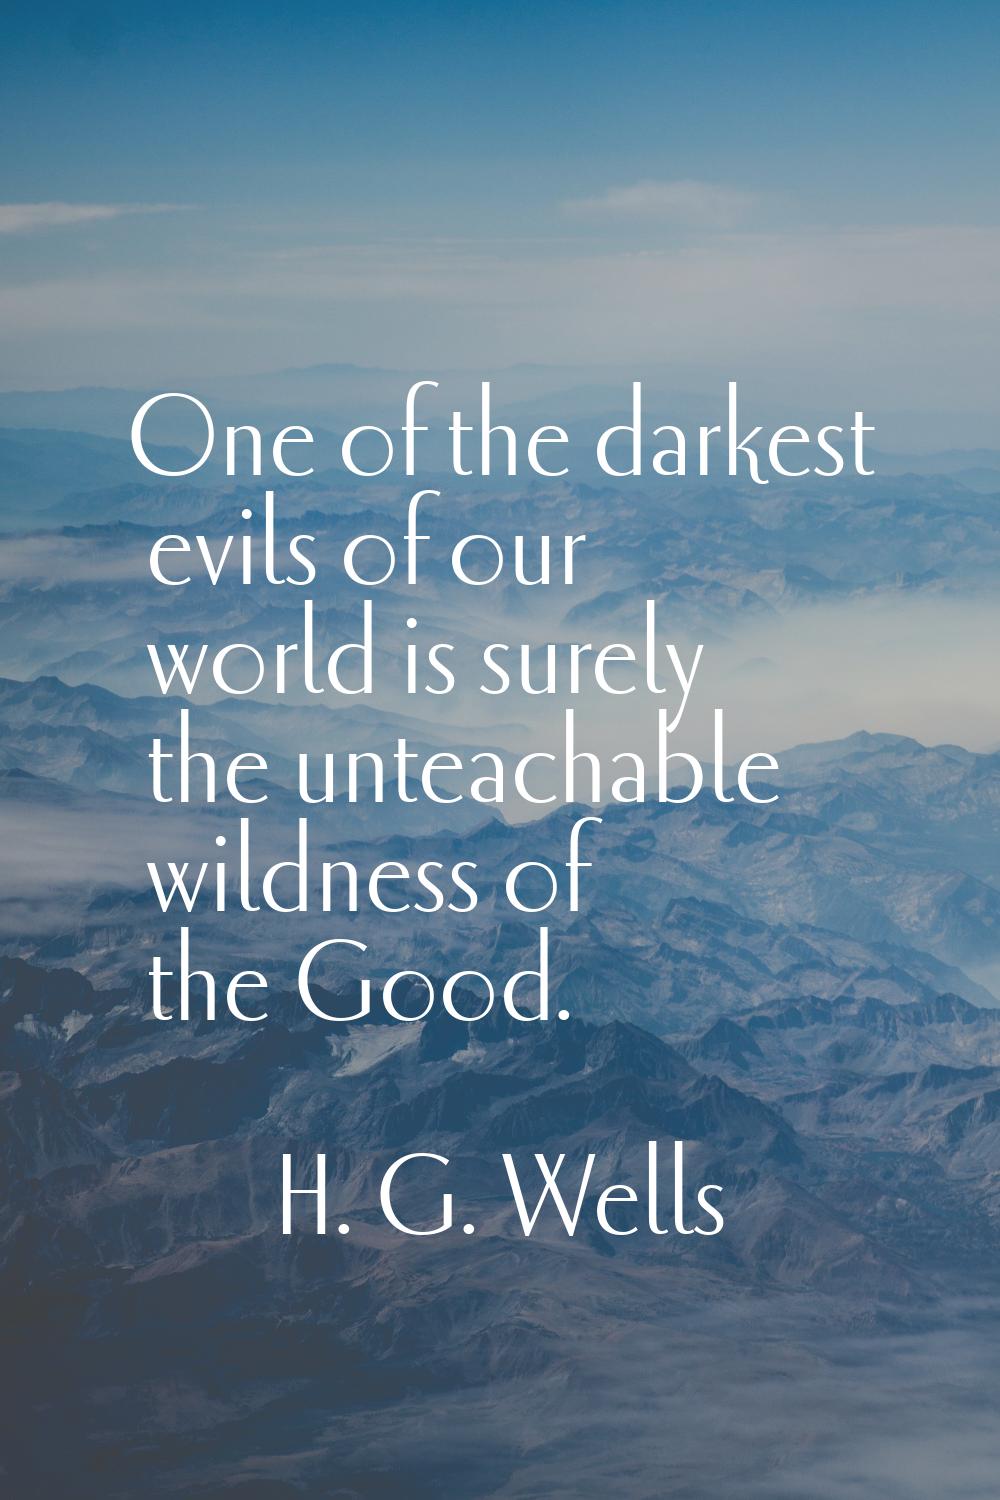 One of the darkest evils of our world is surely the unteachable wildness of the Good.